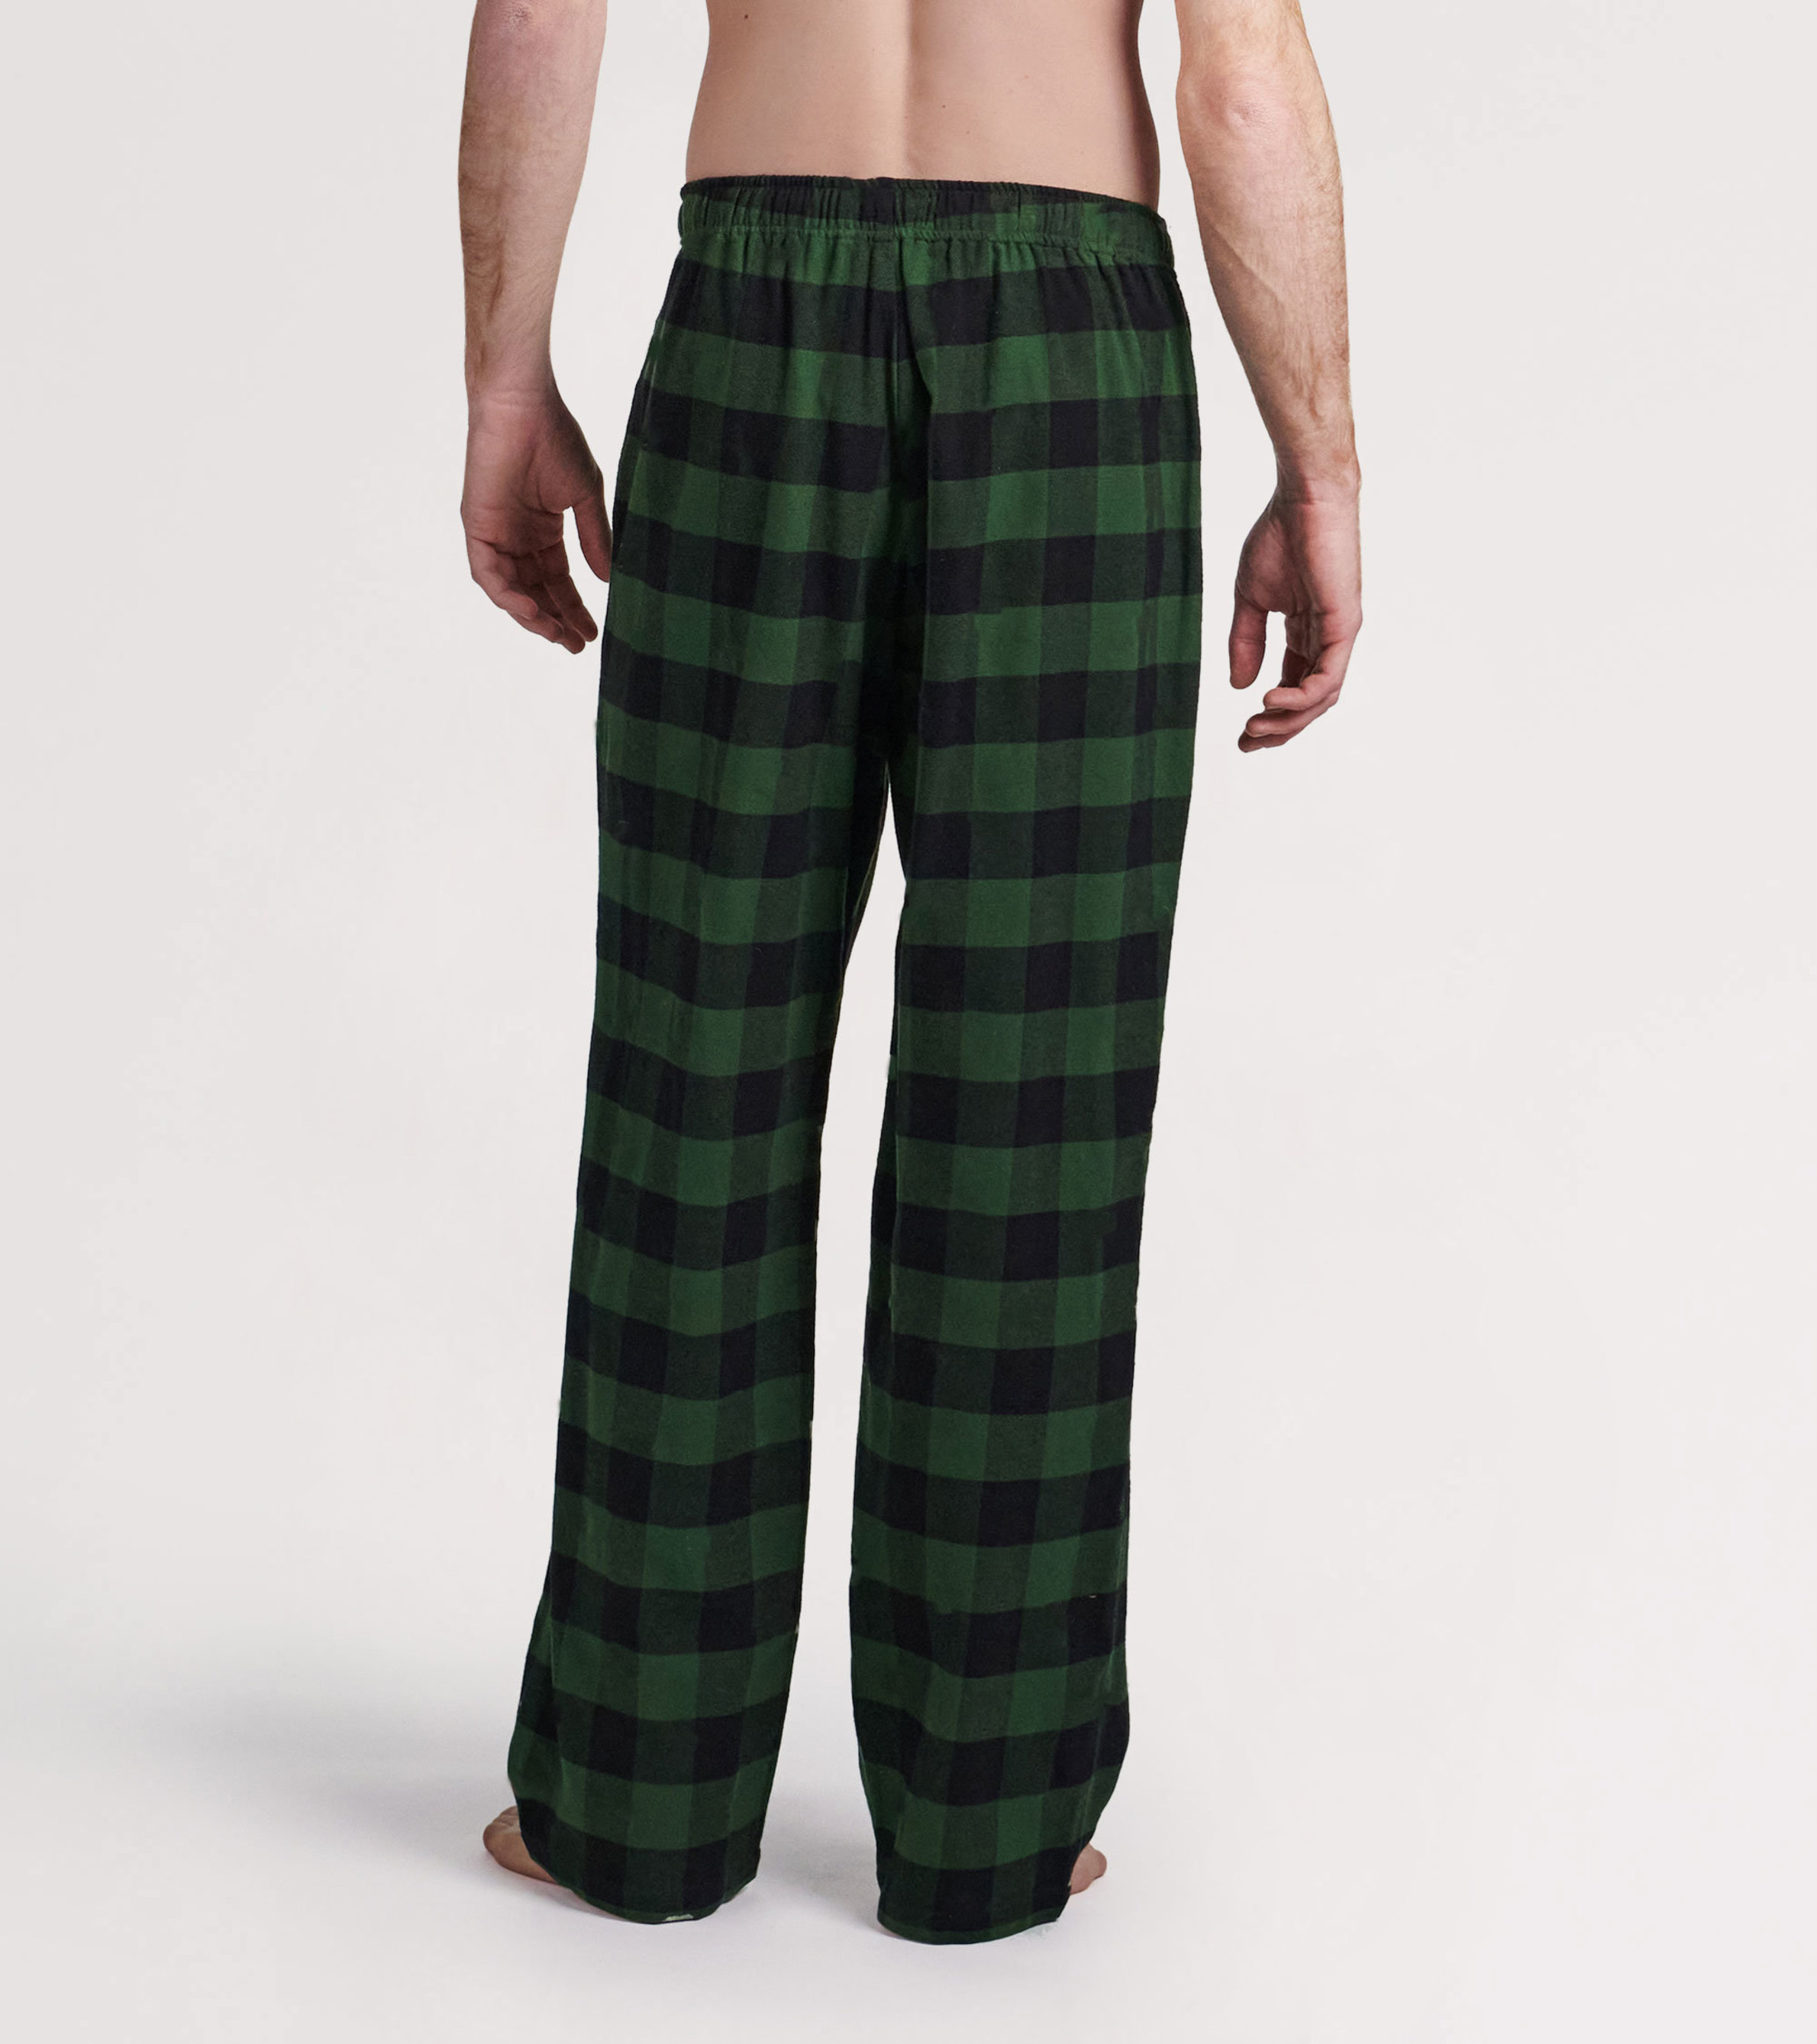 Hit the Slopes - Men's Flannel Pajama Pants - Frosted Lake